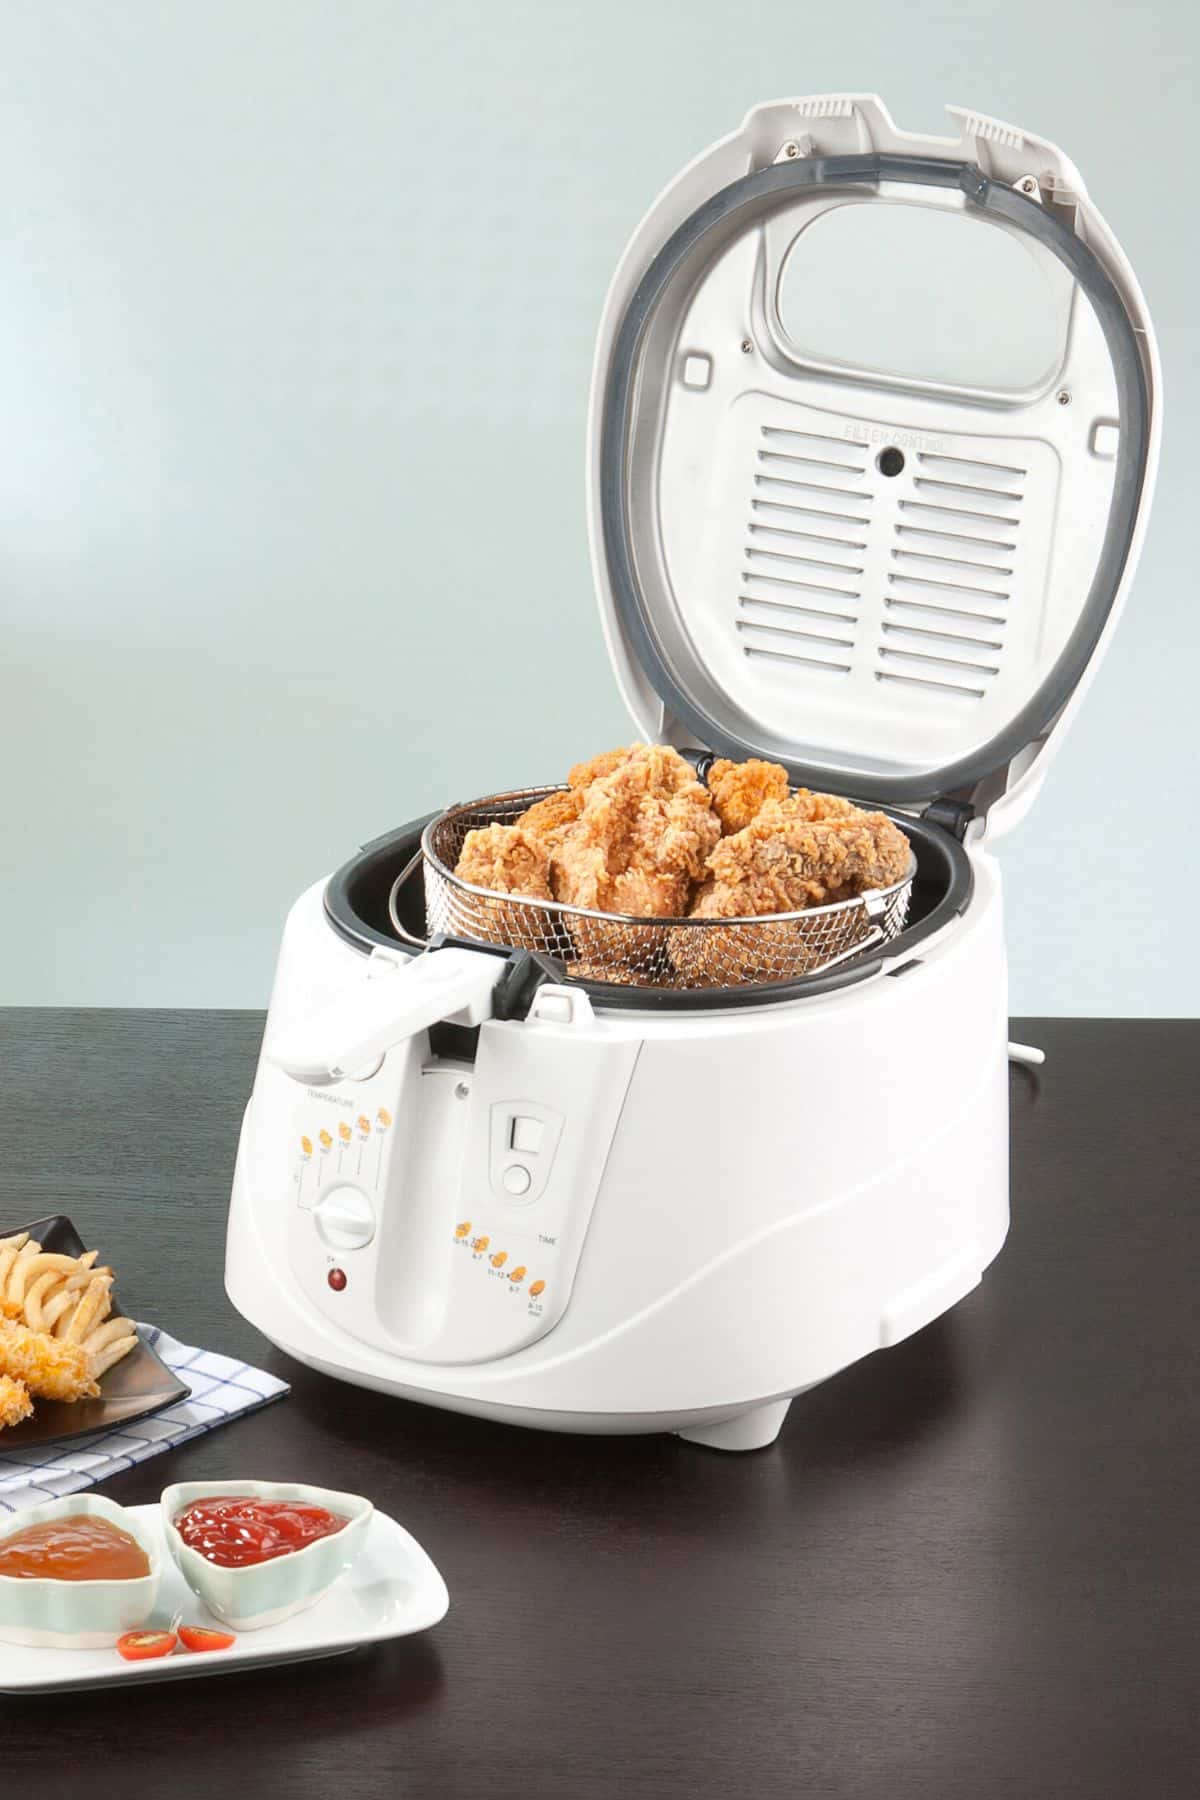 White deep fryer with open lid and fried chicken inside.